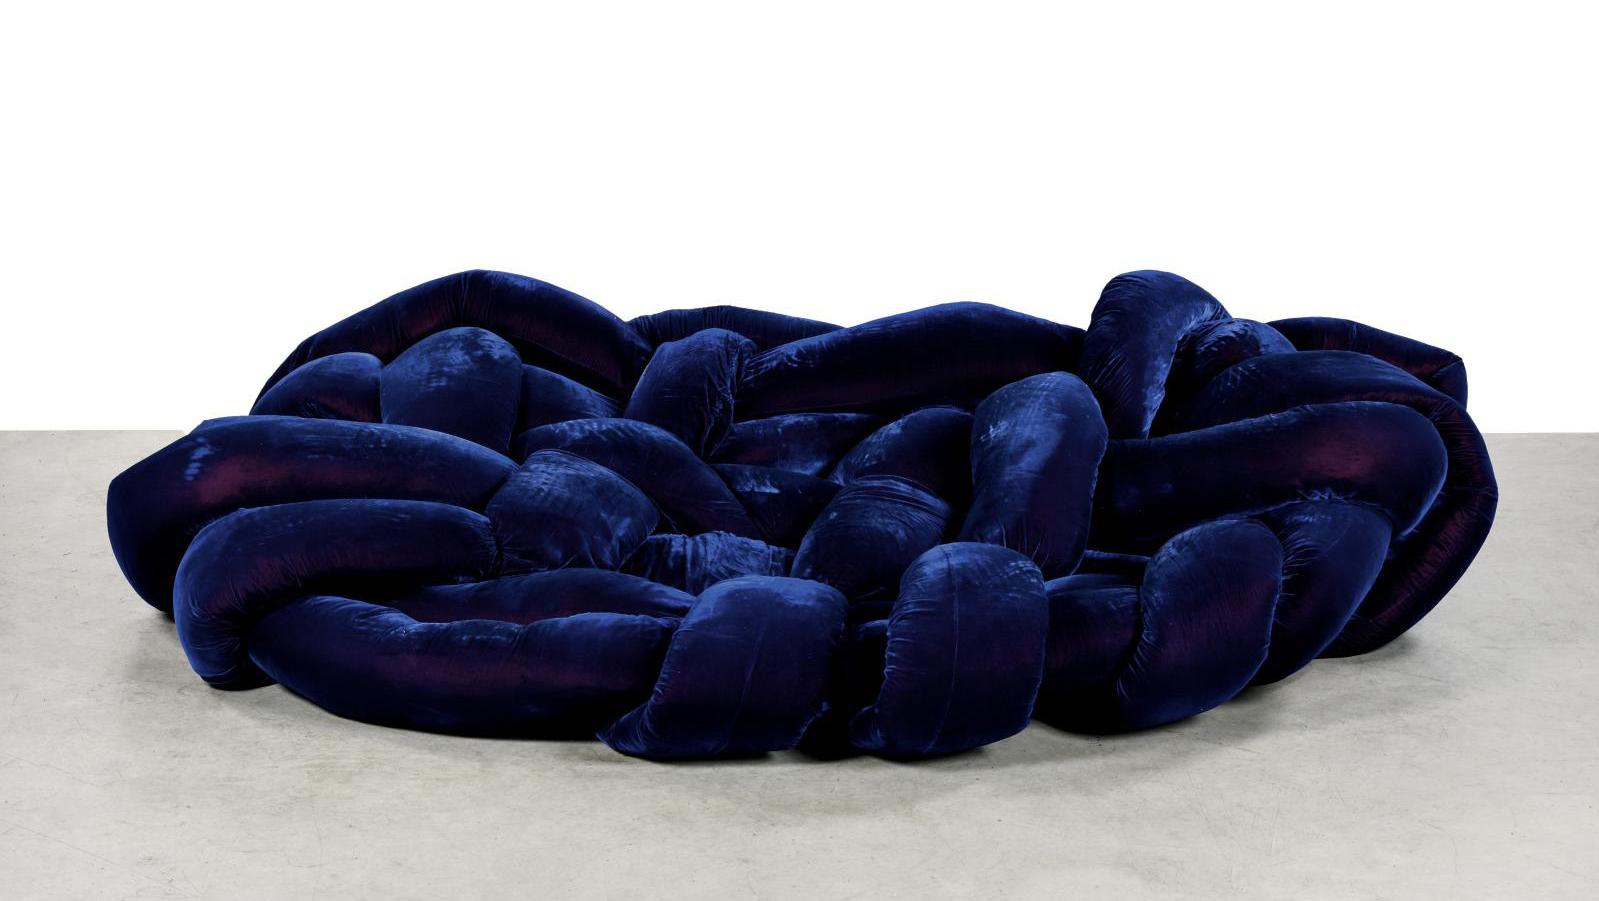   Campana Brothers: Curling Up On a Boa